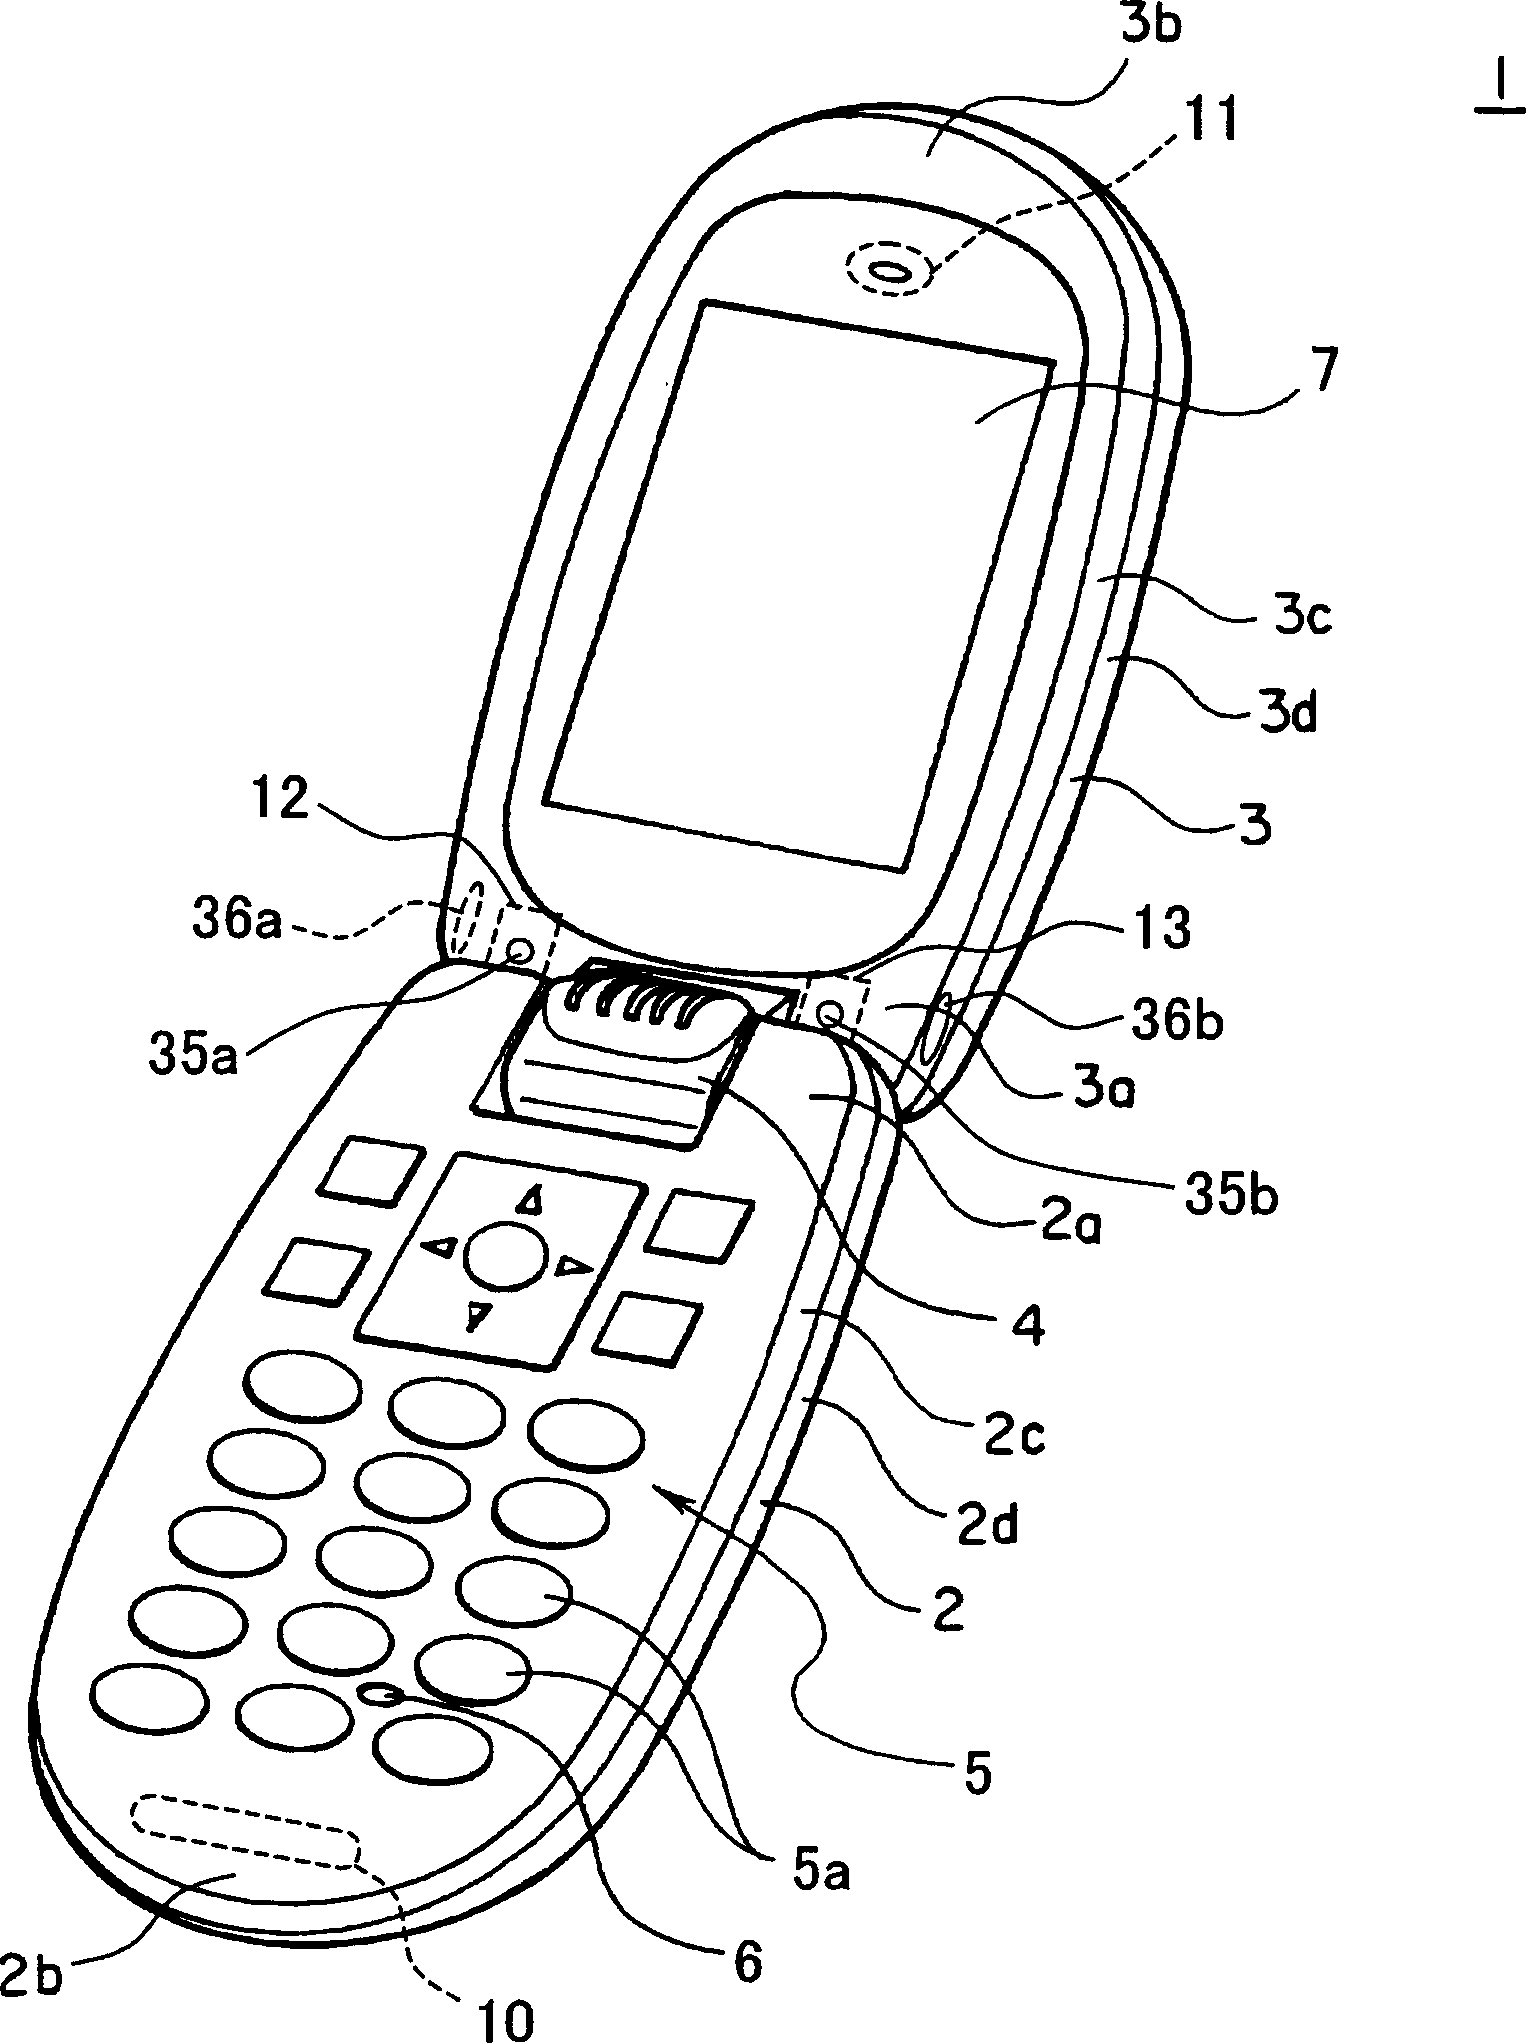 Acoustic device